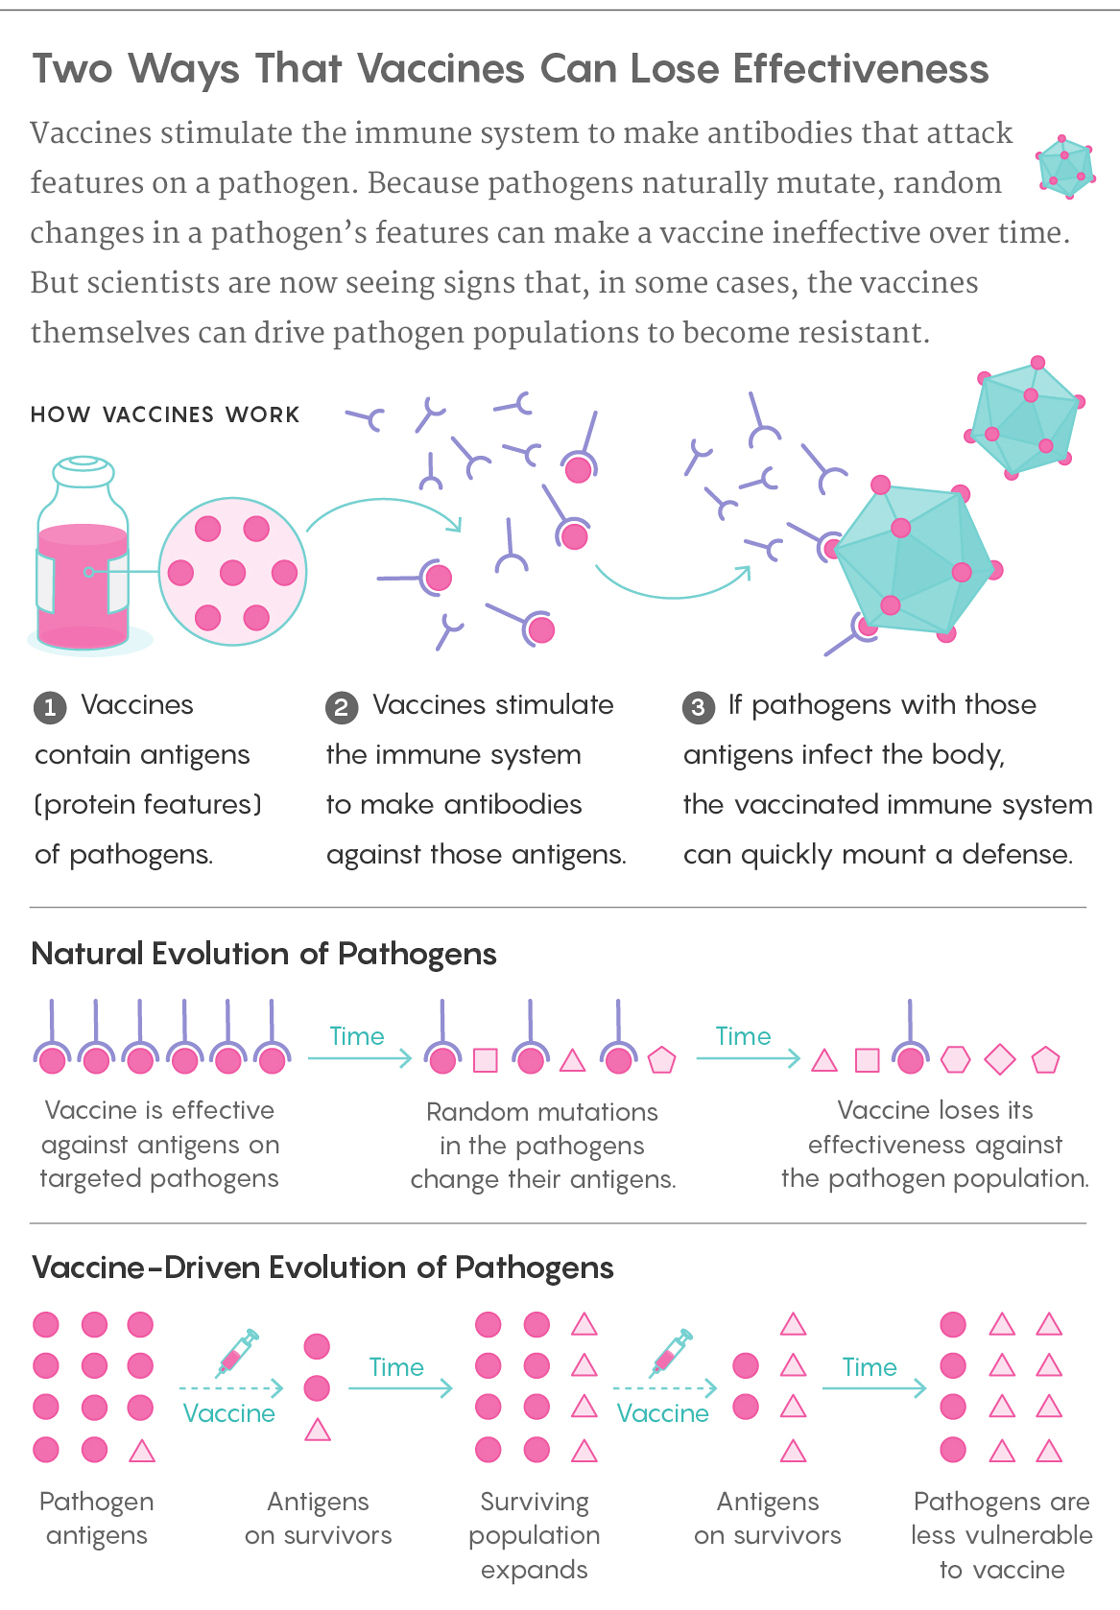 Graphic illustration: Vaccines stimulate the immune system to make antibodies that attack features on a pathogen. Because pathogens naturally mutate, random changes in a pathogen’s features can make a vaccine ineffective over time. But scientists are now seeing signs that, in some cases, the vaccines themselves can drive pathogen populations to become resistant.